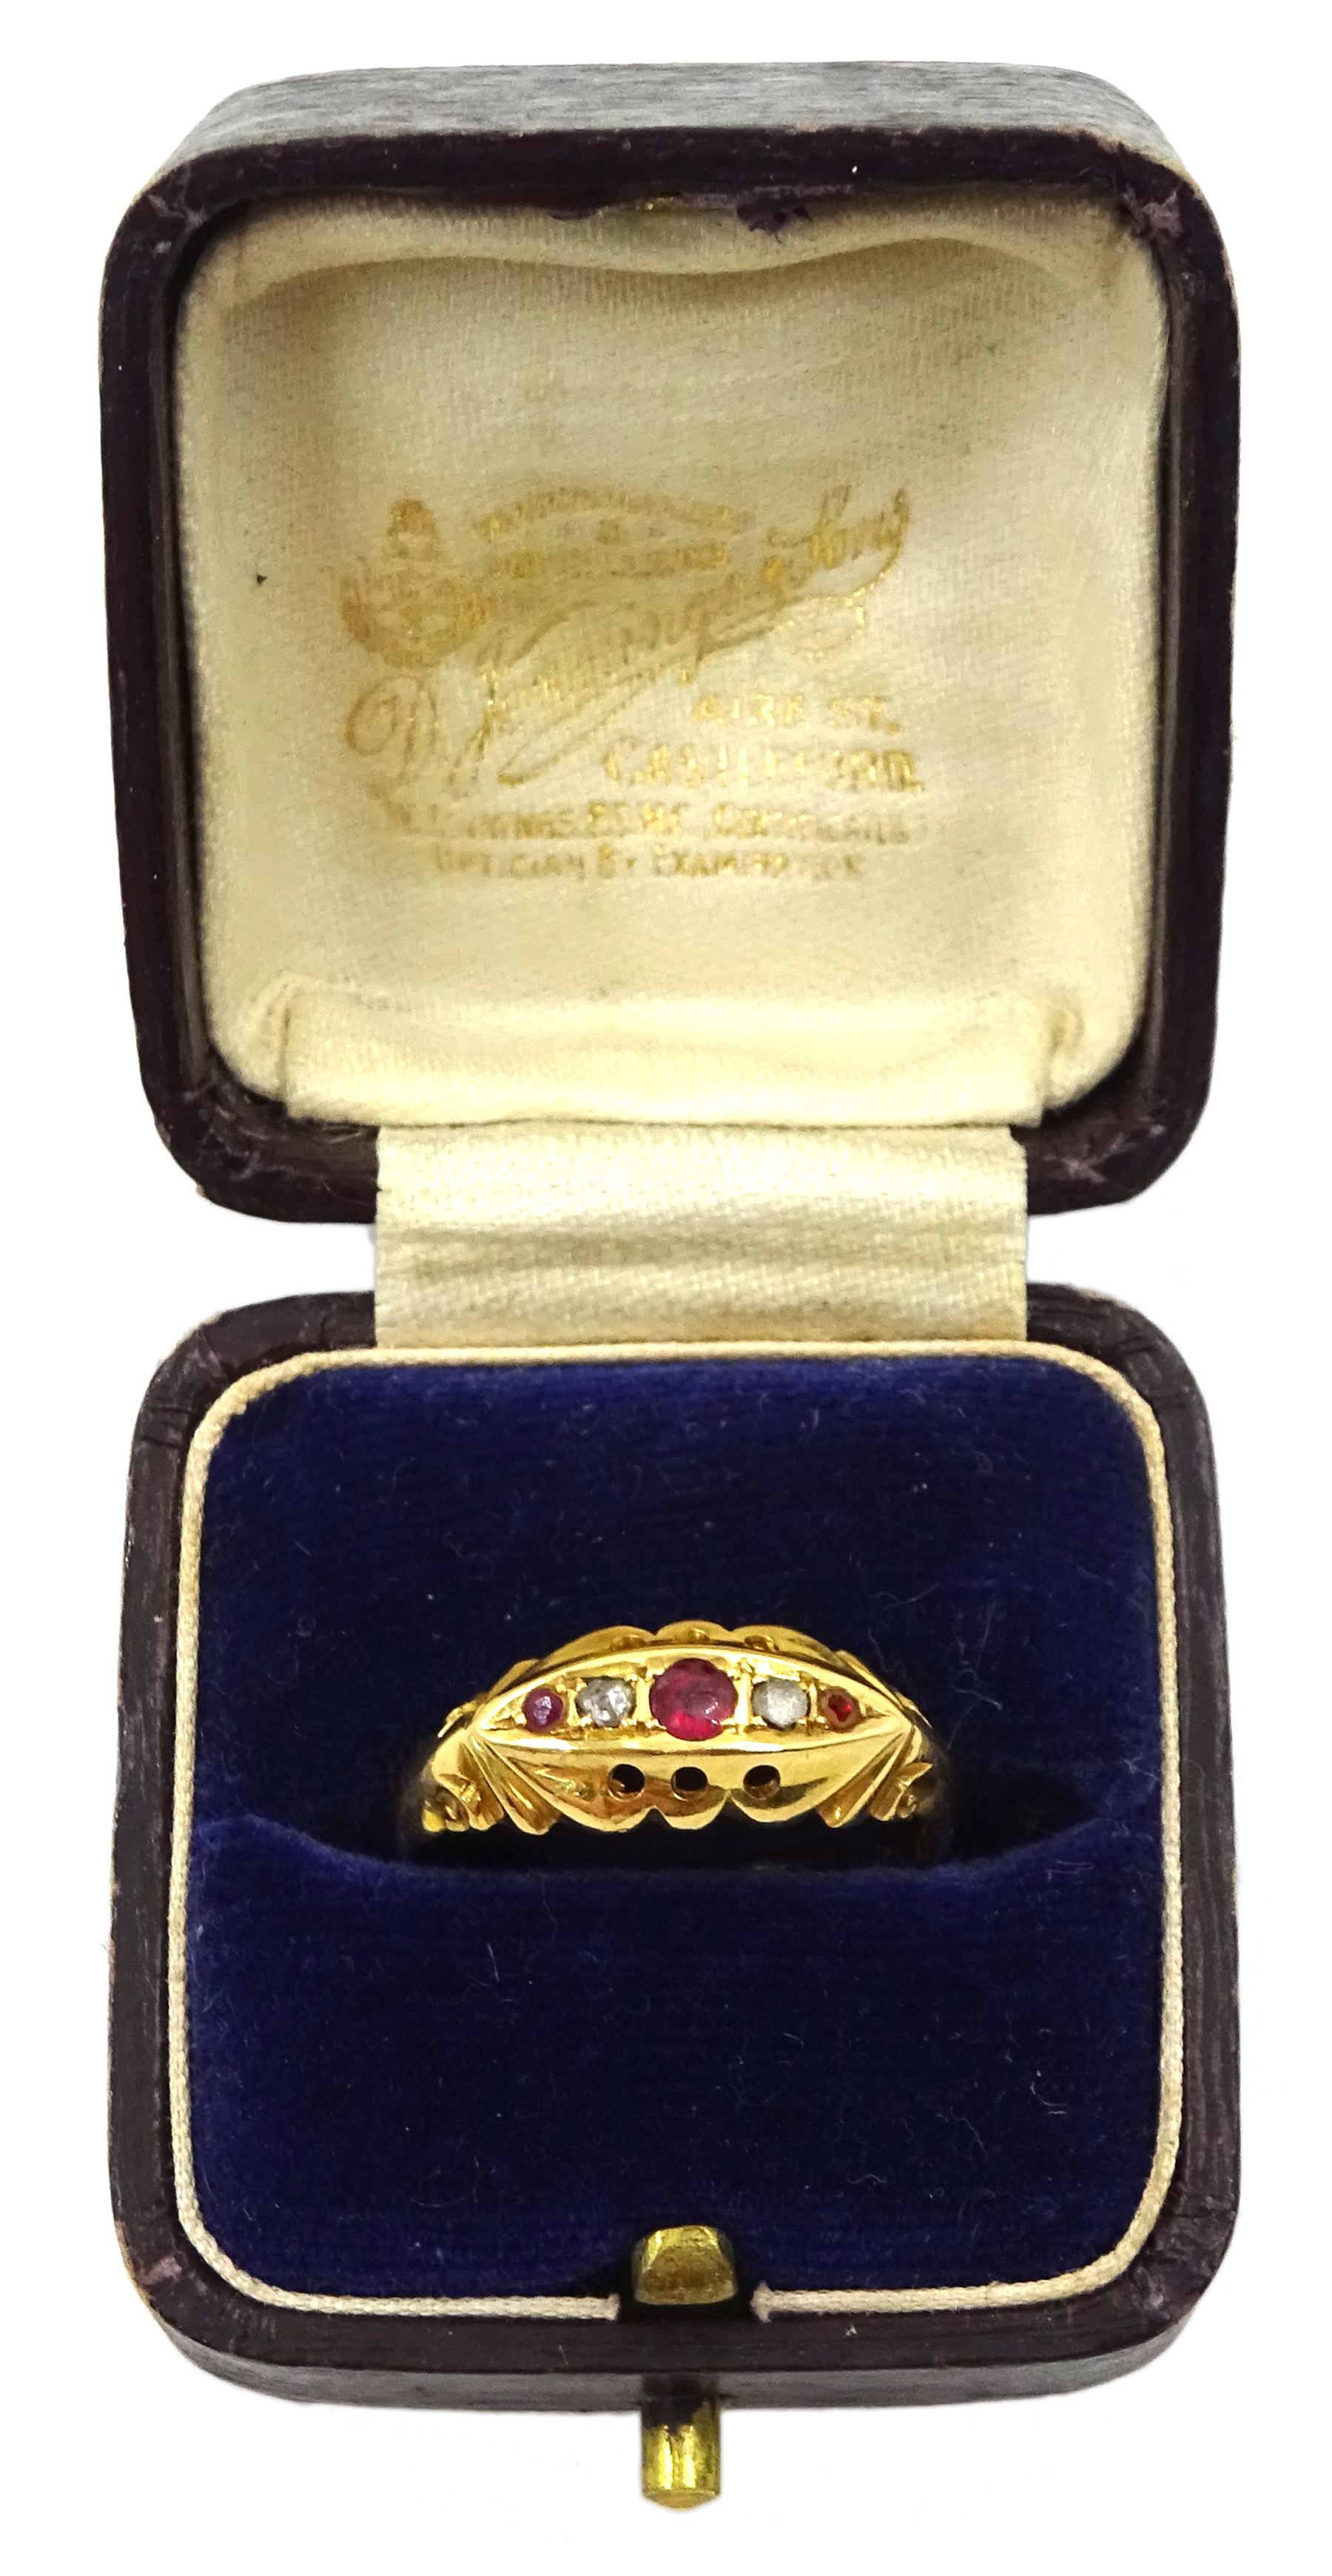 Early 20th century 18ct gold five stone diamond and pink stone ring - Image 5 of 5